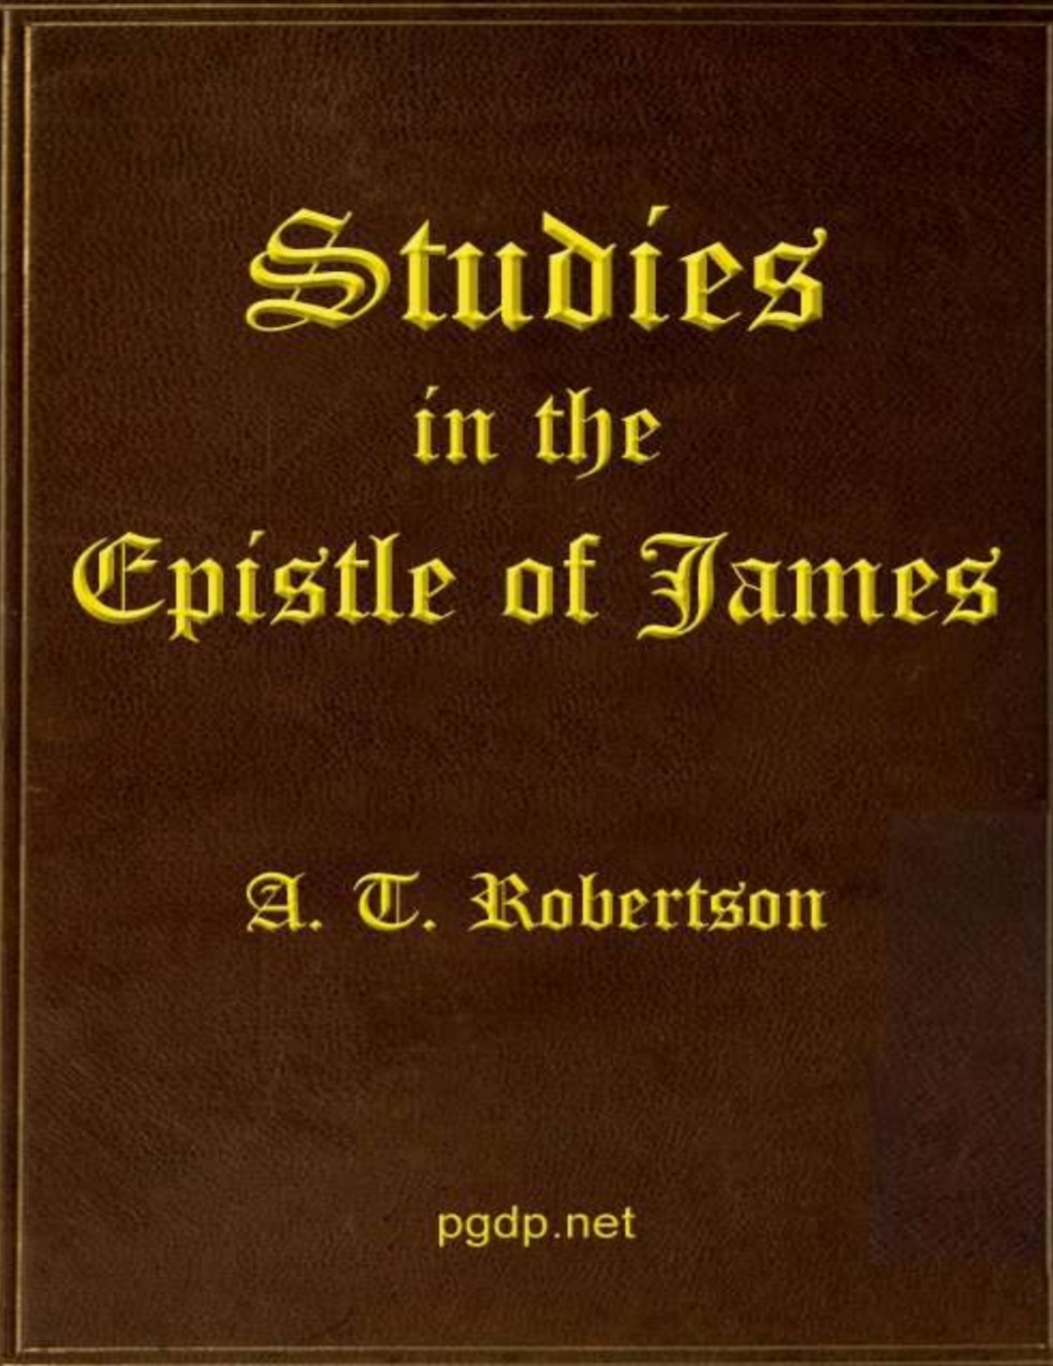 COMMENTARY ON THE EPISTLE OF JAMES BY A.J ROBERTSON